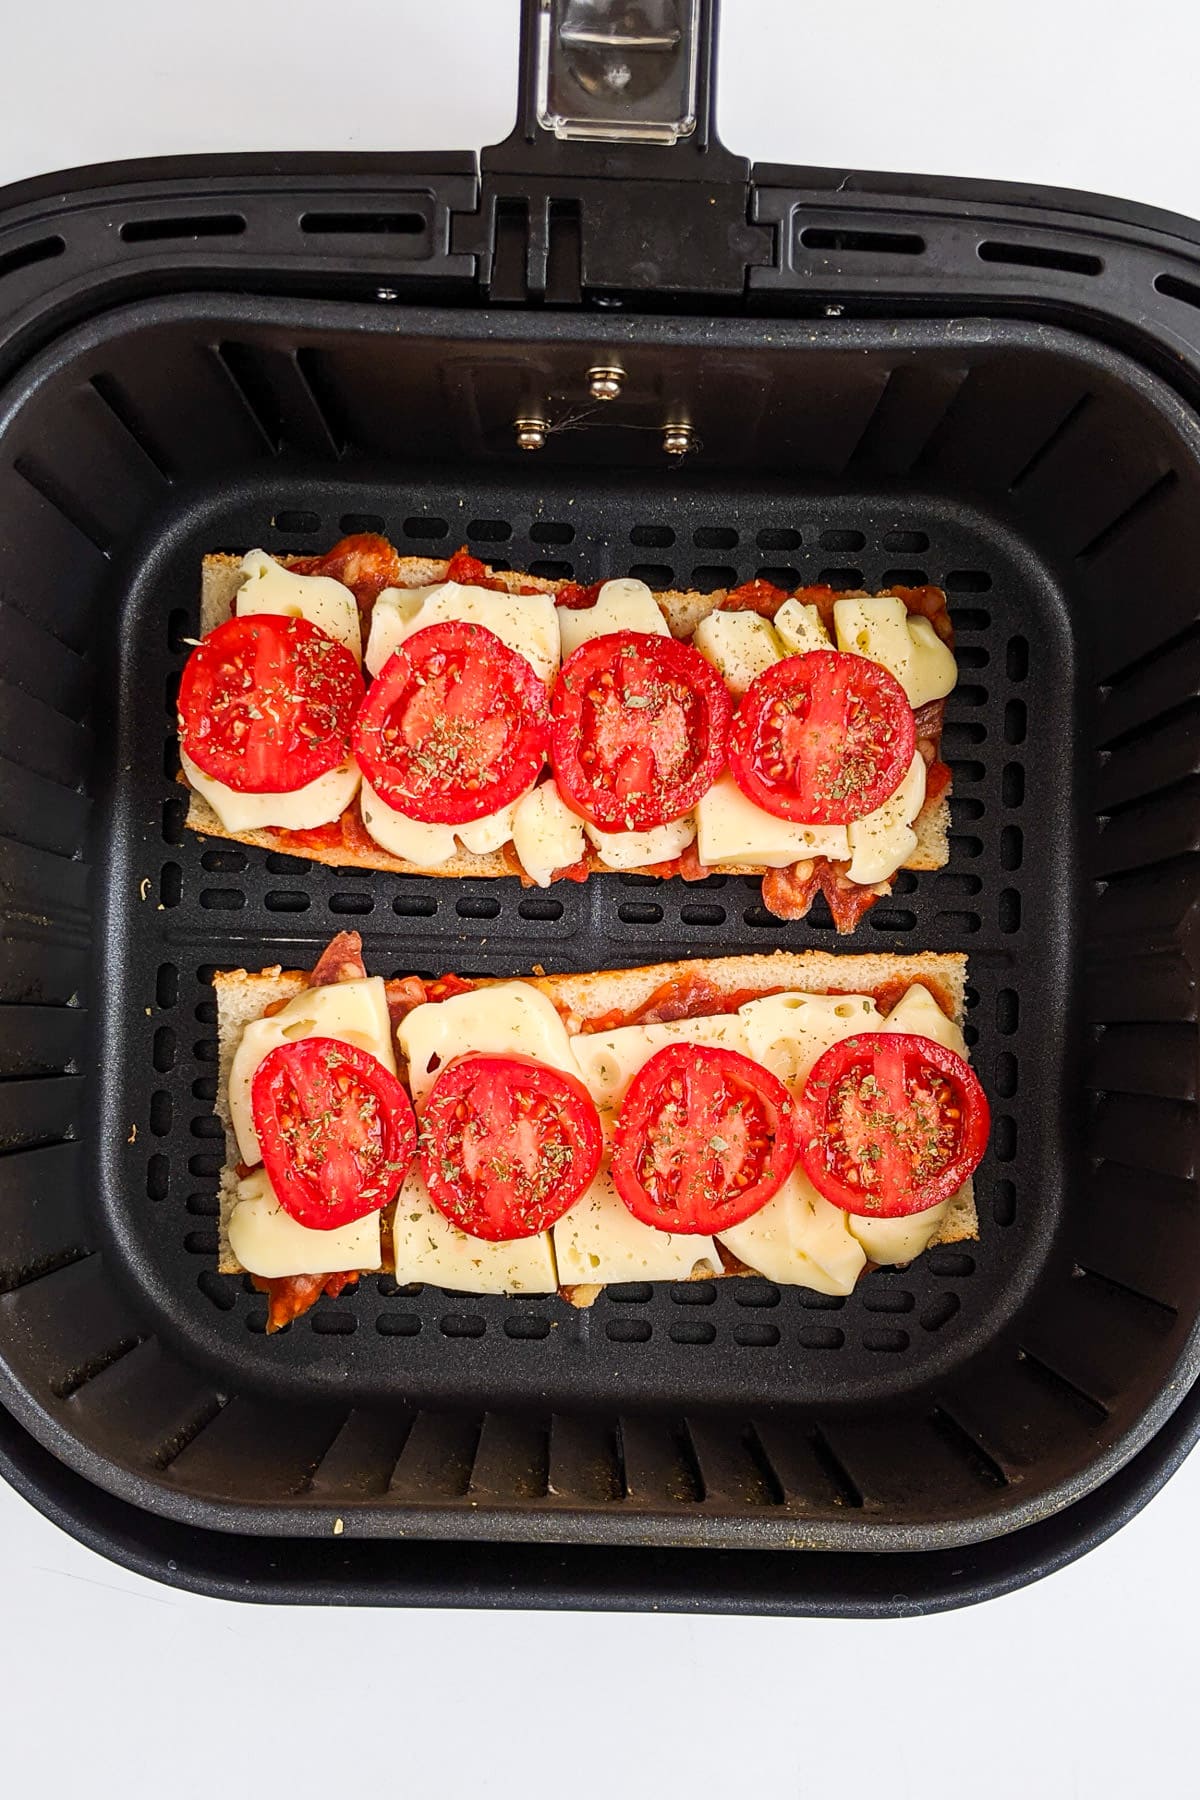 French bread pizza with fresh tomatoes in air fryer basket.